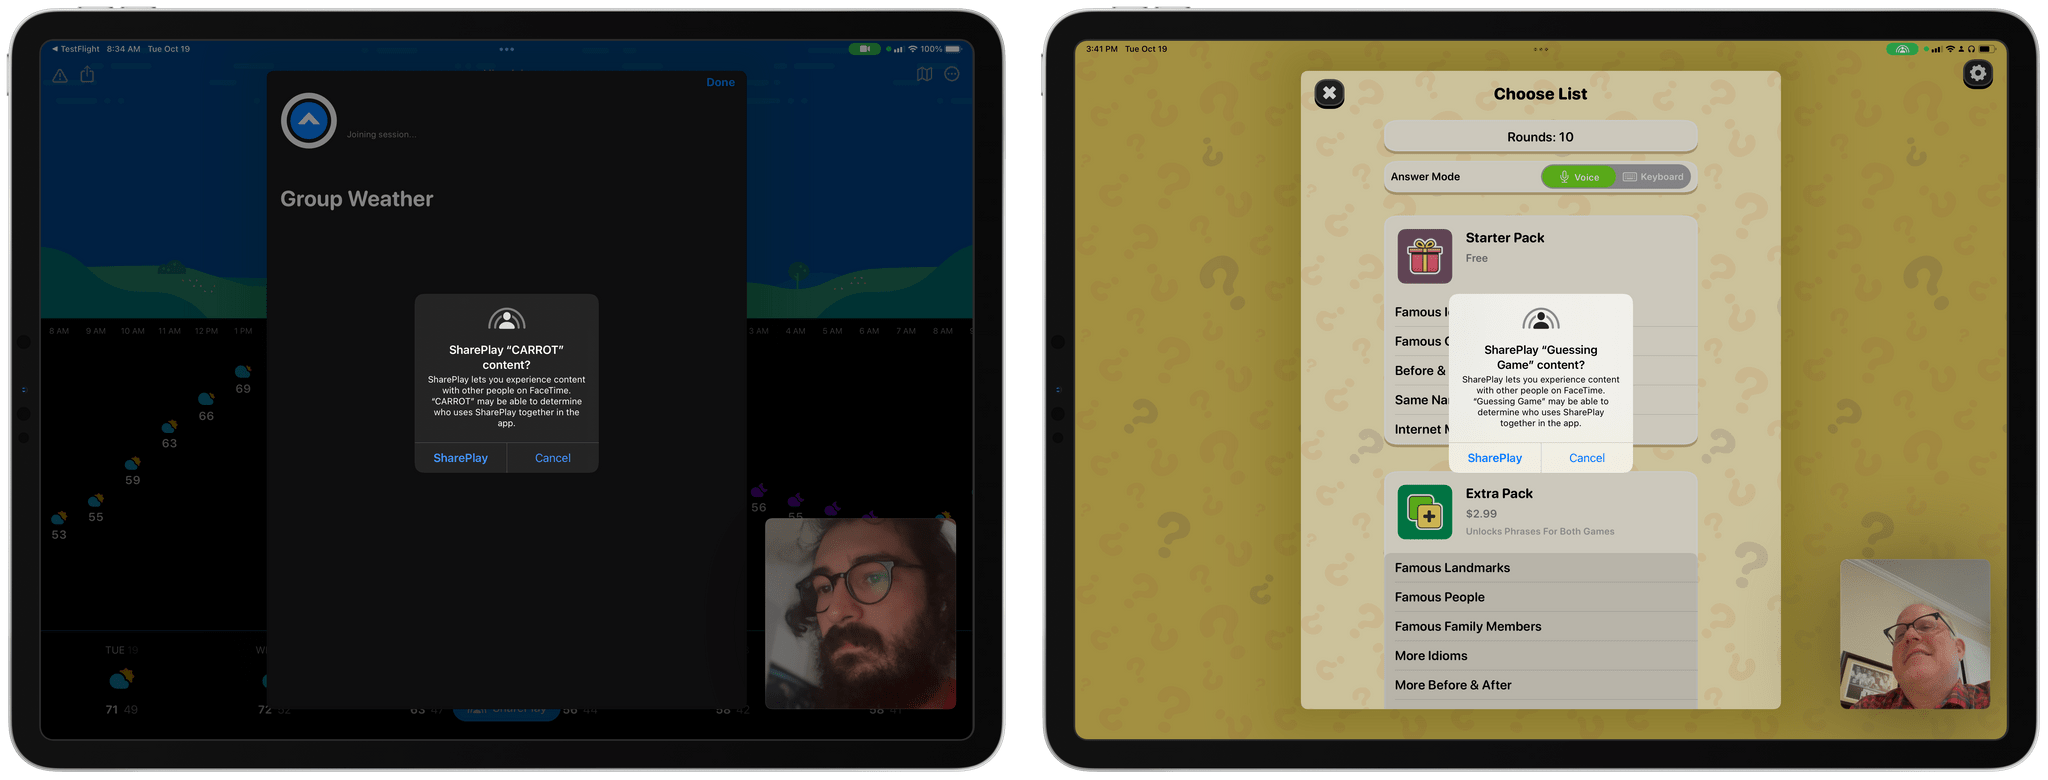 While third-party developers can design custom UIs to detect when FaceTime is active and SharePlay can be started, the initial permission dialog is consistent everywhere.